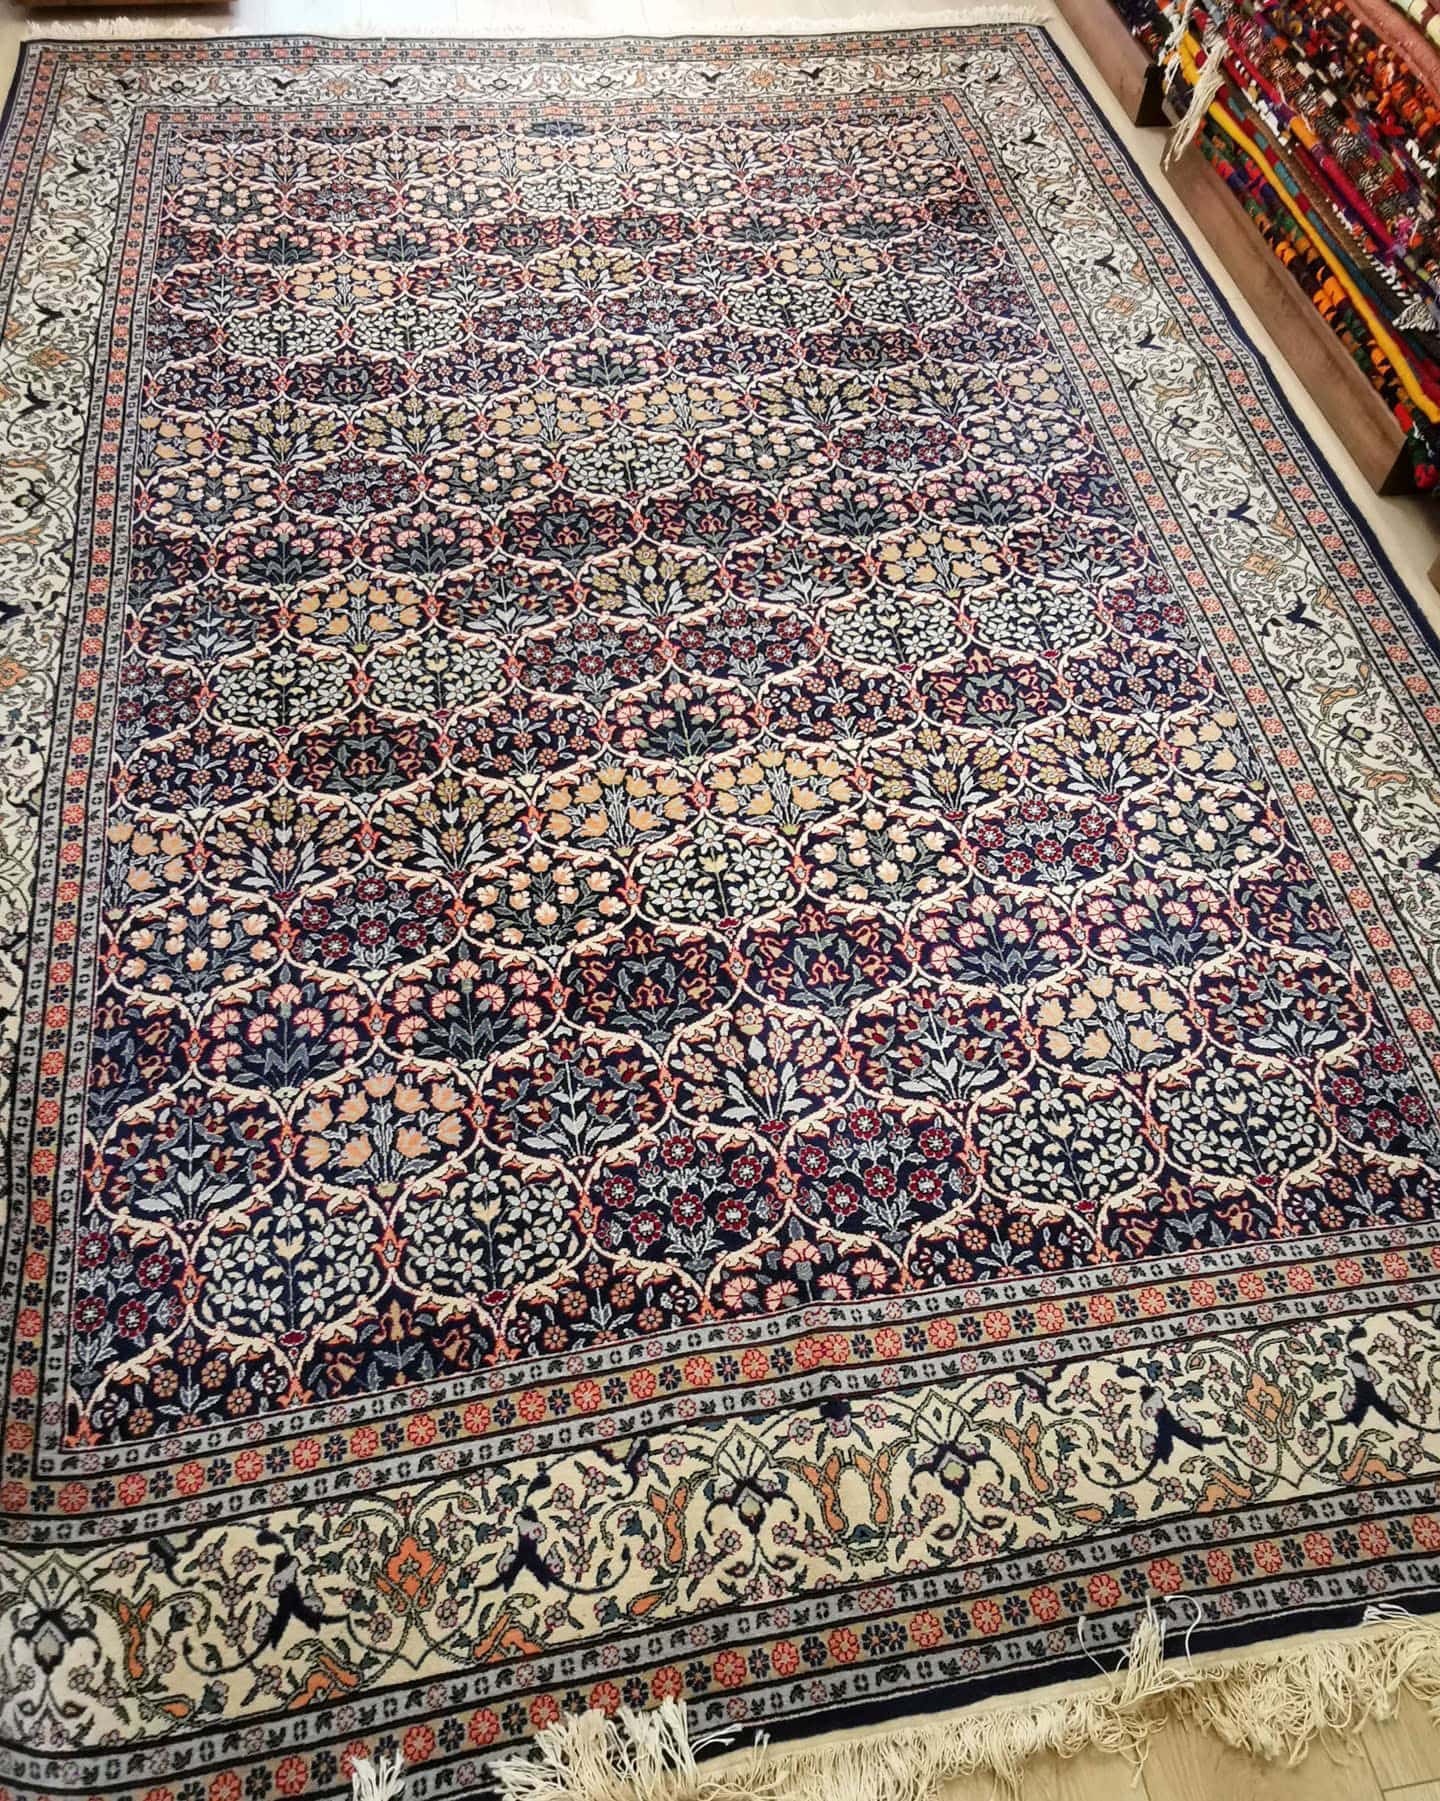 luxury fine antique Turkish Hereke silk carpet in pastel, earthy, and neutral floral motifs and patterns